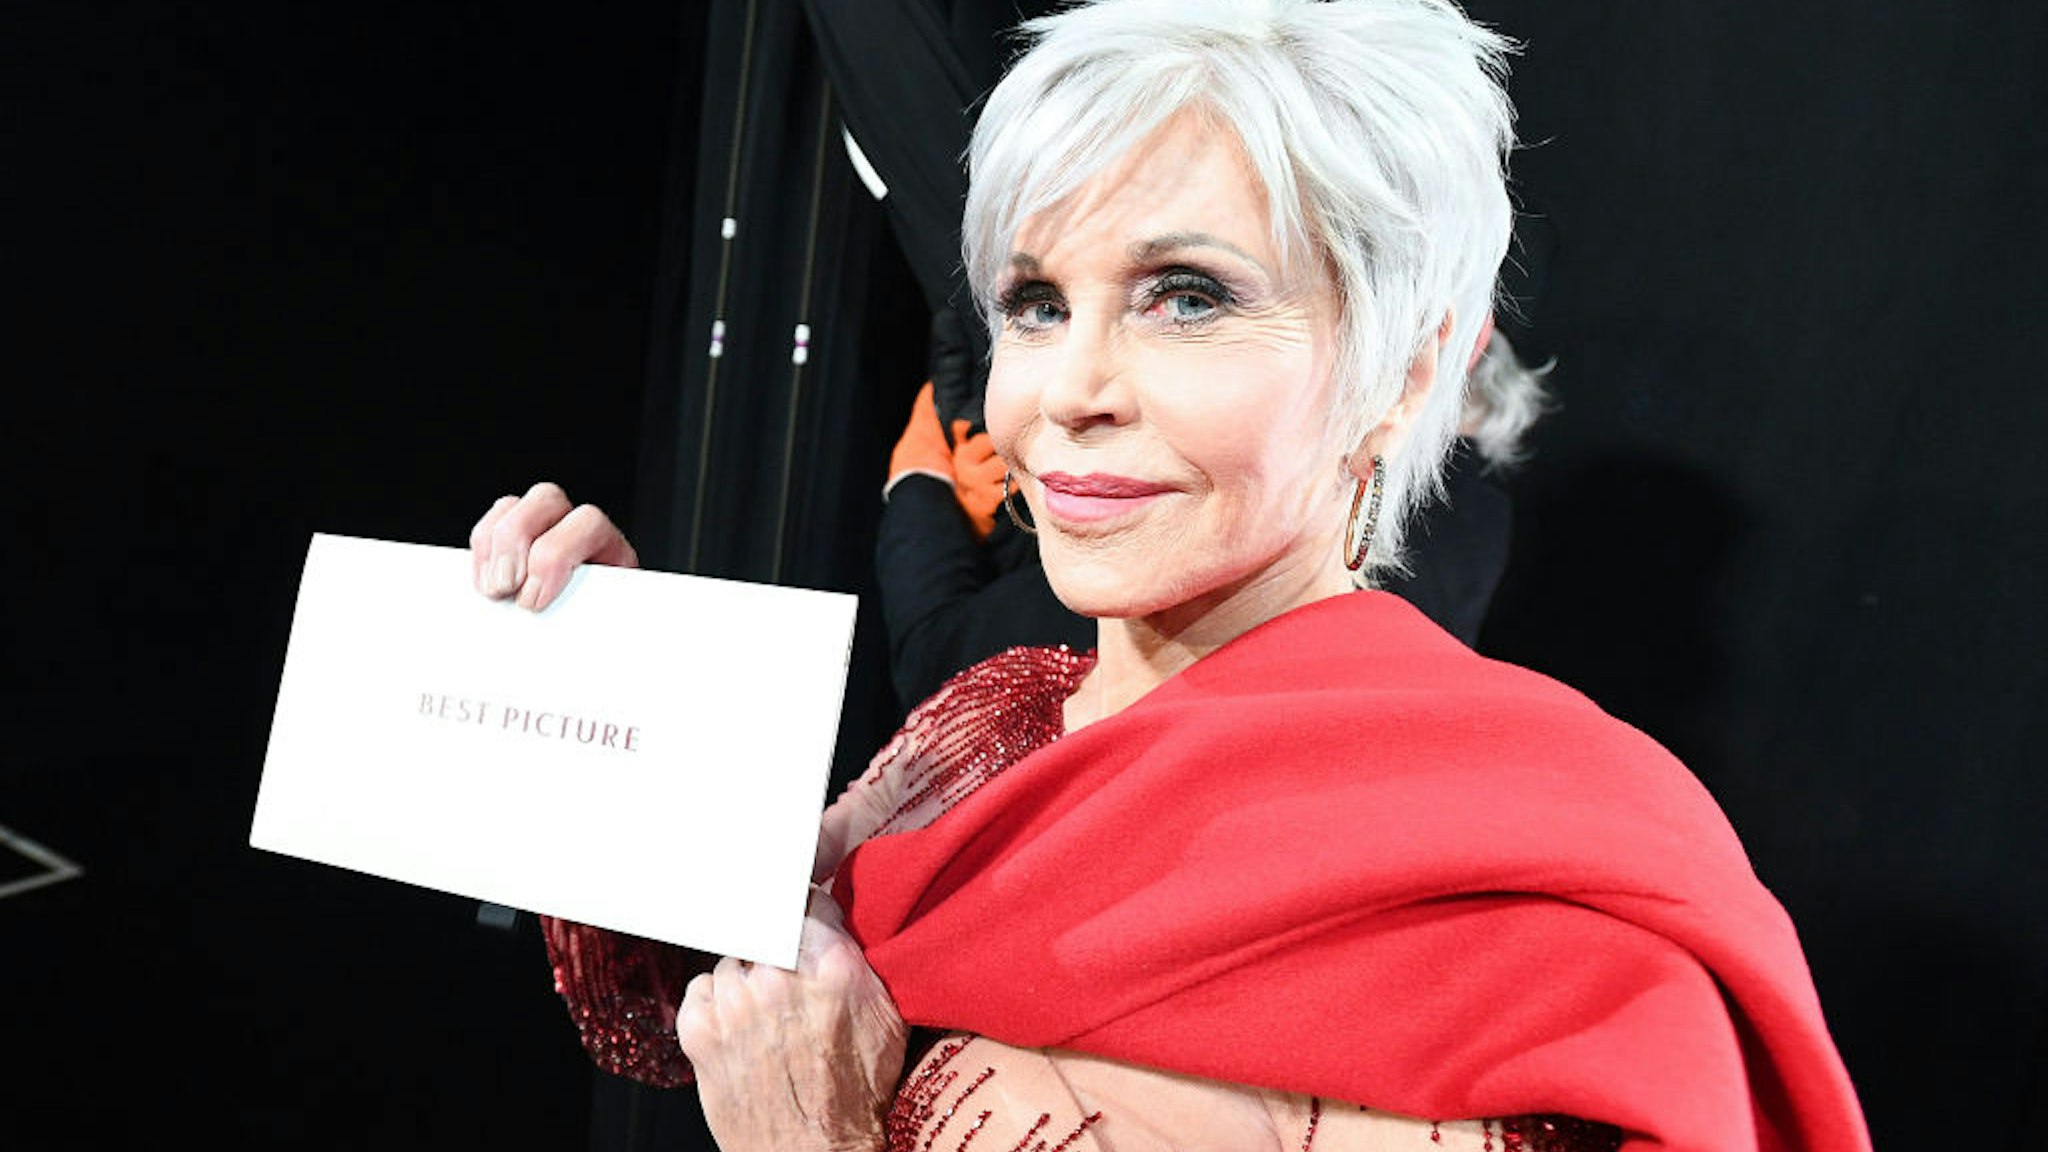 n this handout photo provided by A.M.P.A.S. Jane Fonda poses with the Best Picture envelope backstage during the 92nd Annual Academy Awards at the Dolby Theatre on February 09, 2020 in Hollywood, California.